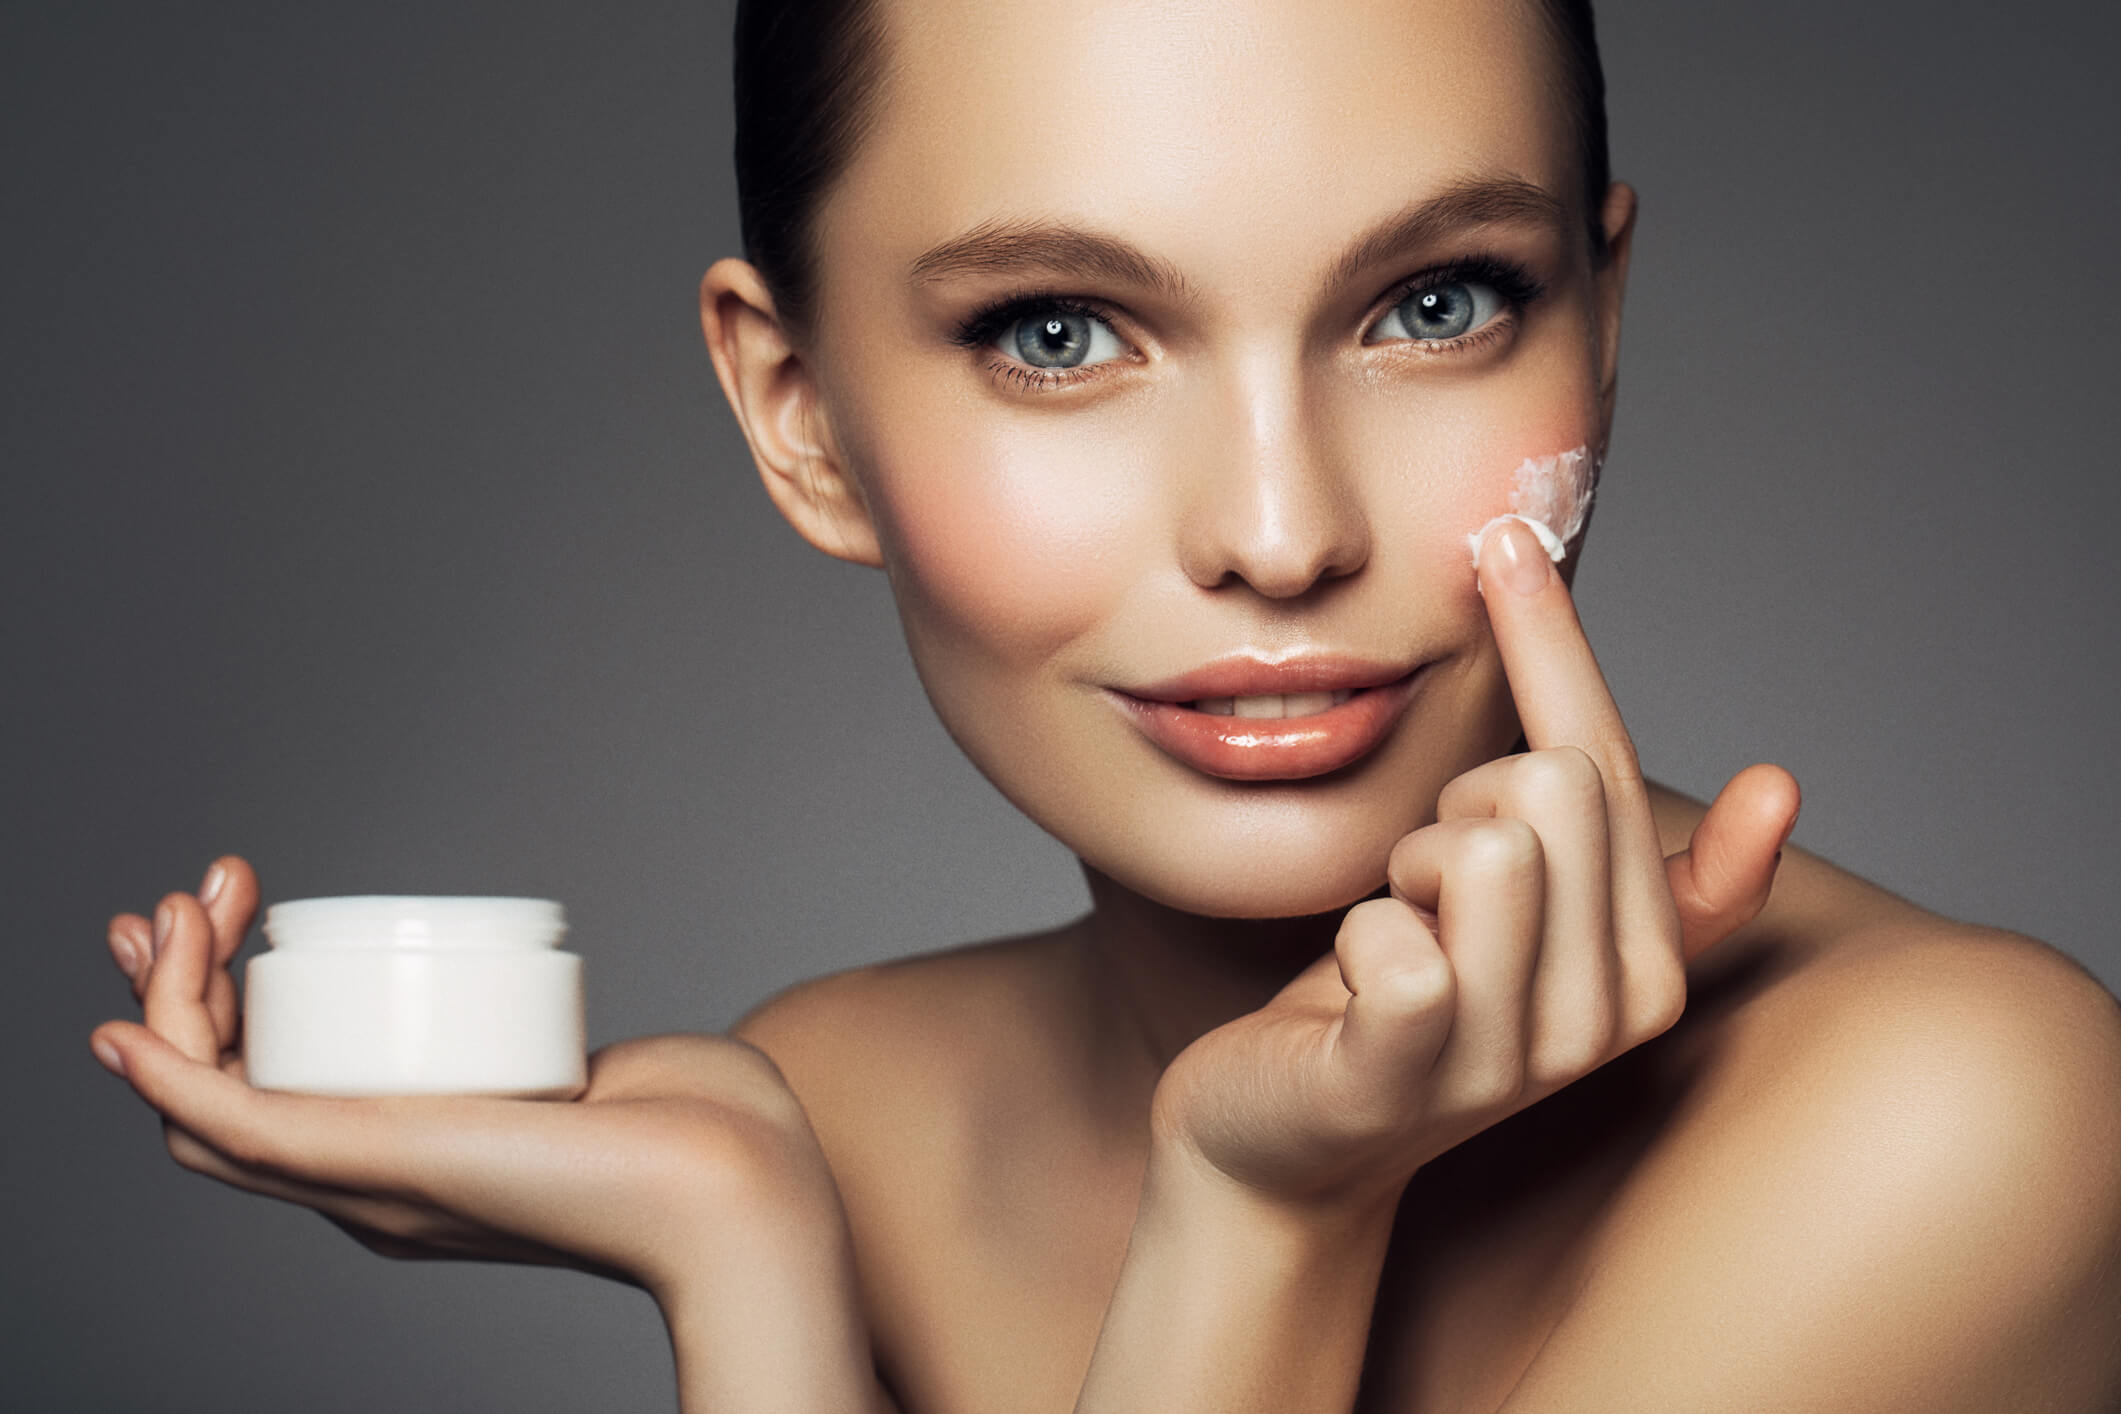 Ranking of the best face creams for sensitive skin for 2022